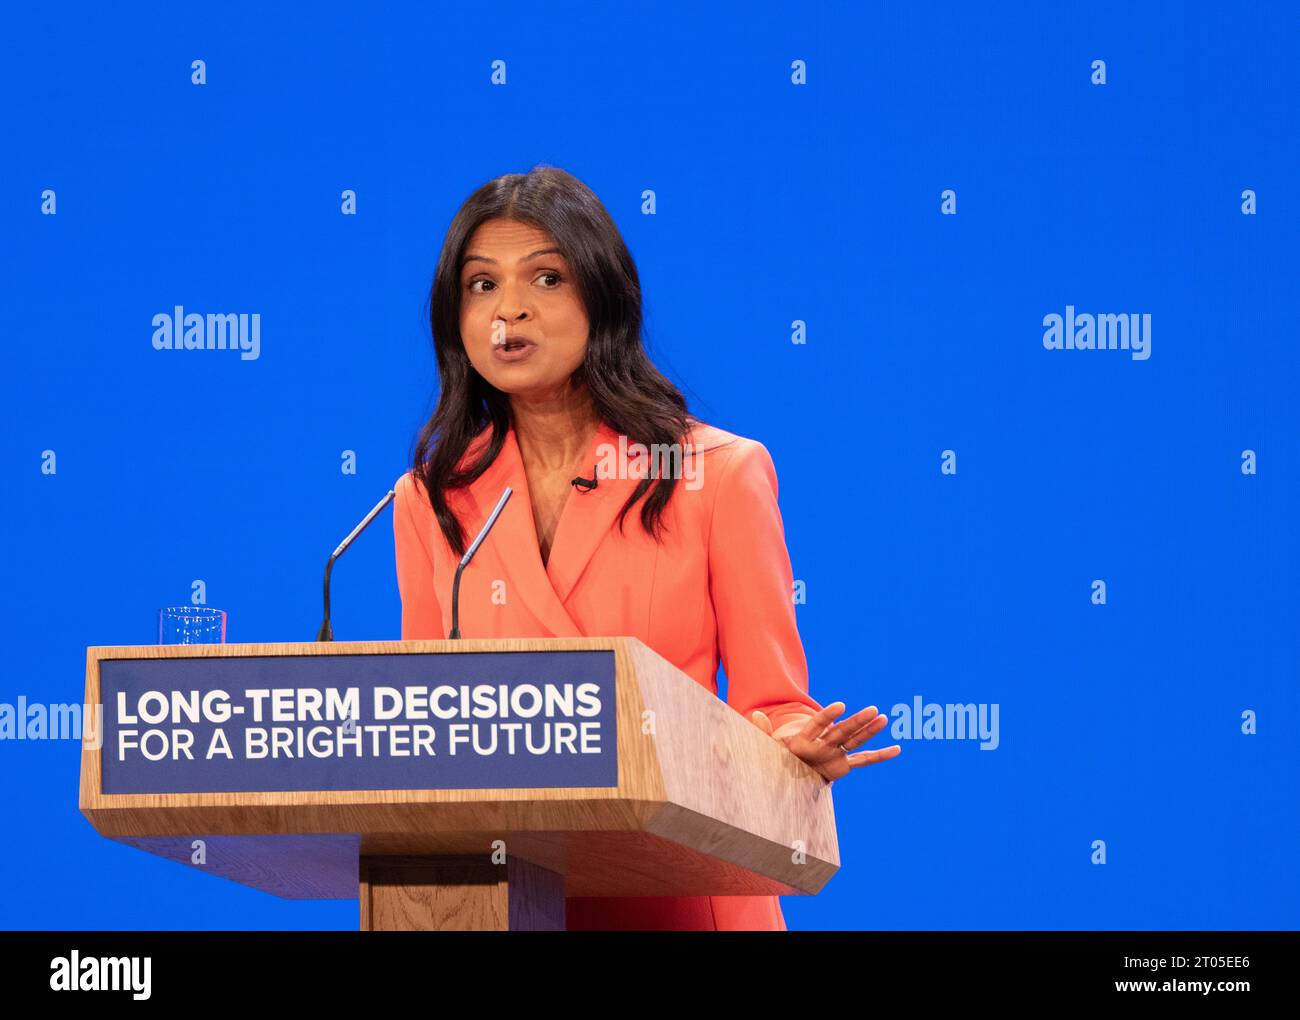 Manchester, UK. 04th Oct, 2023. PMs wife Akshata Murthy introduces Prime Minister Rishi Sunak before he gives the final speech of the conservative party conference 2023. Penny Mordaunt and Johnny Mercer had both given speeches earlier. The PM walked from the Midland Hotel to the Manchester Conference centre where he gave the speech introduced by his wife Akshata Murthy. Manchester UK. Credit: GaryRobertsphotography/Alamy Live News Stock Photo